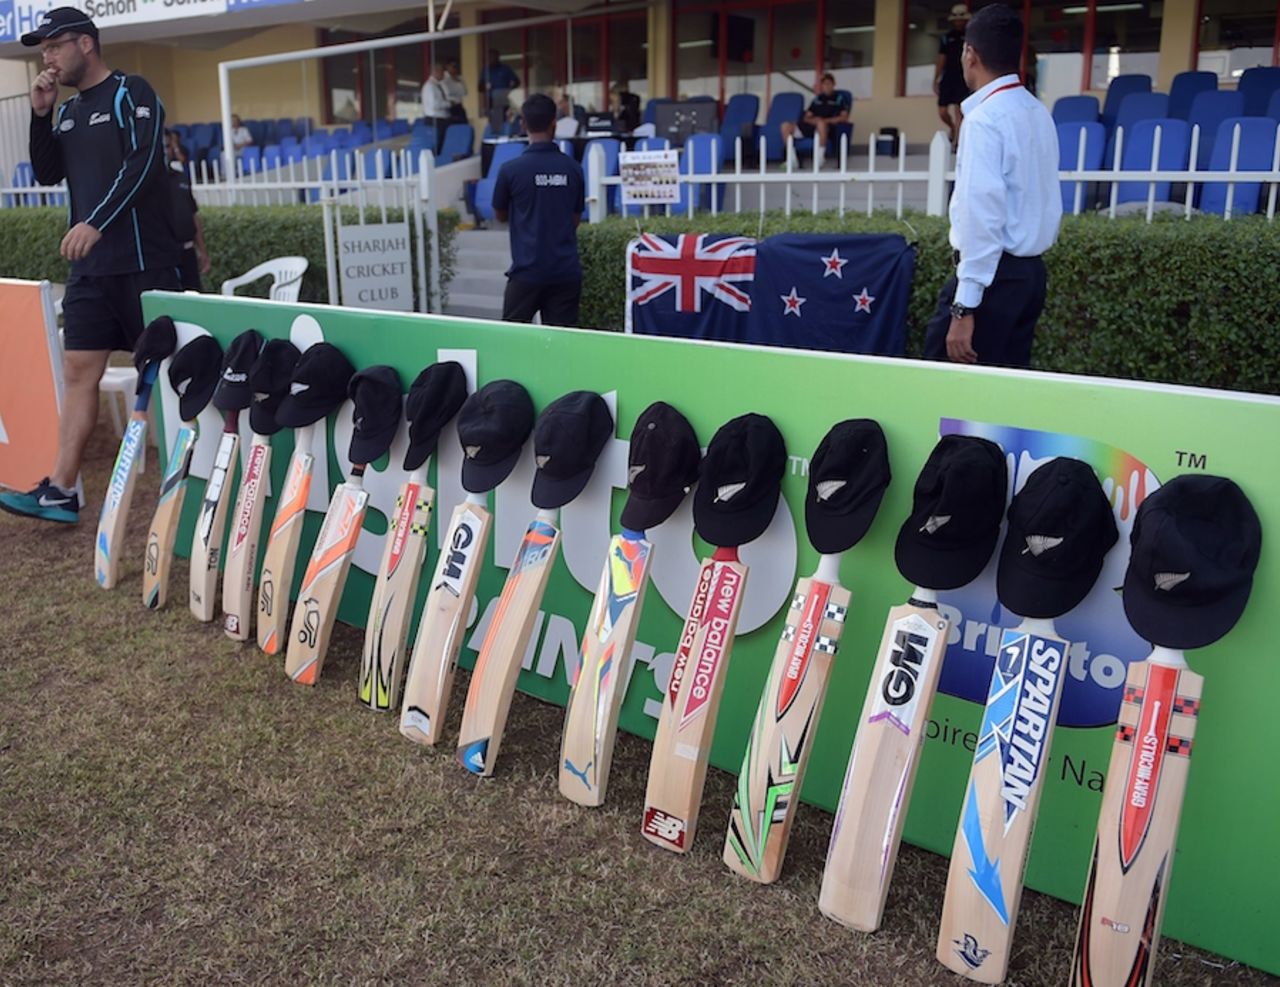 The New Zealand players put their bats out as a tribute for Phillip Hughes, Pakistan v New Zealand, 3rd Test, Sharjah, 2nd day, November 28, 2014